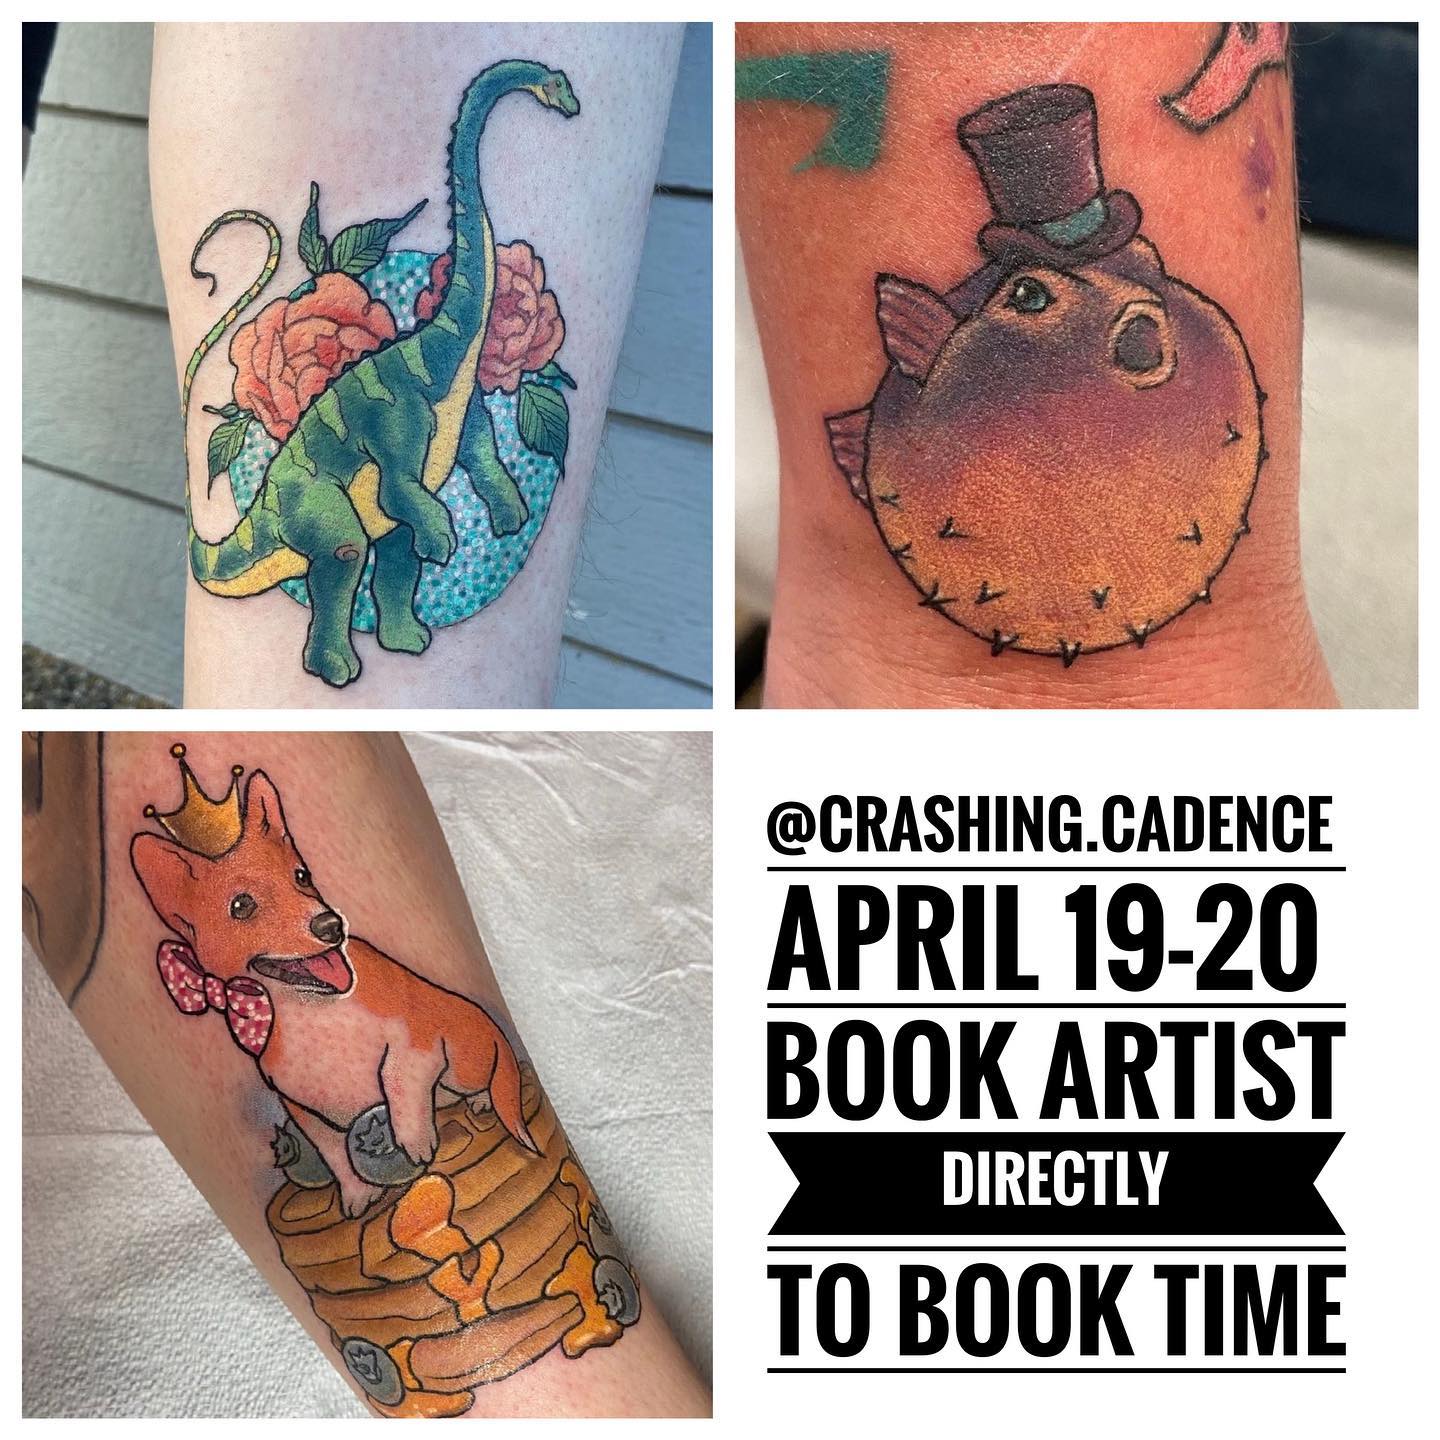 Did you know that @crashing.cadence does a semi-regular guest spot at Tattoo Zoo? They have dates coming up end of April and end of June! Contact artist directly to book time. 🦖